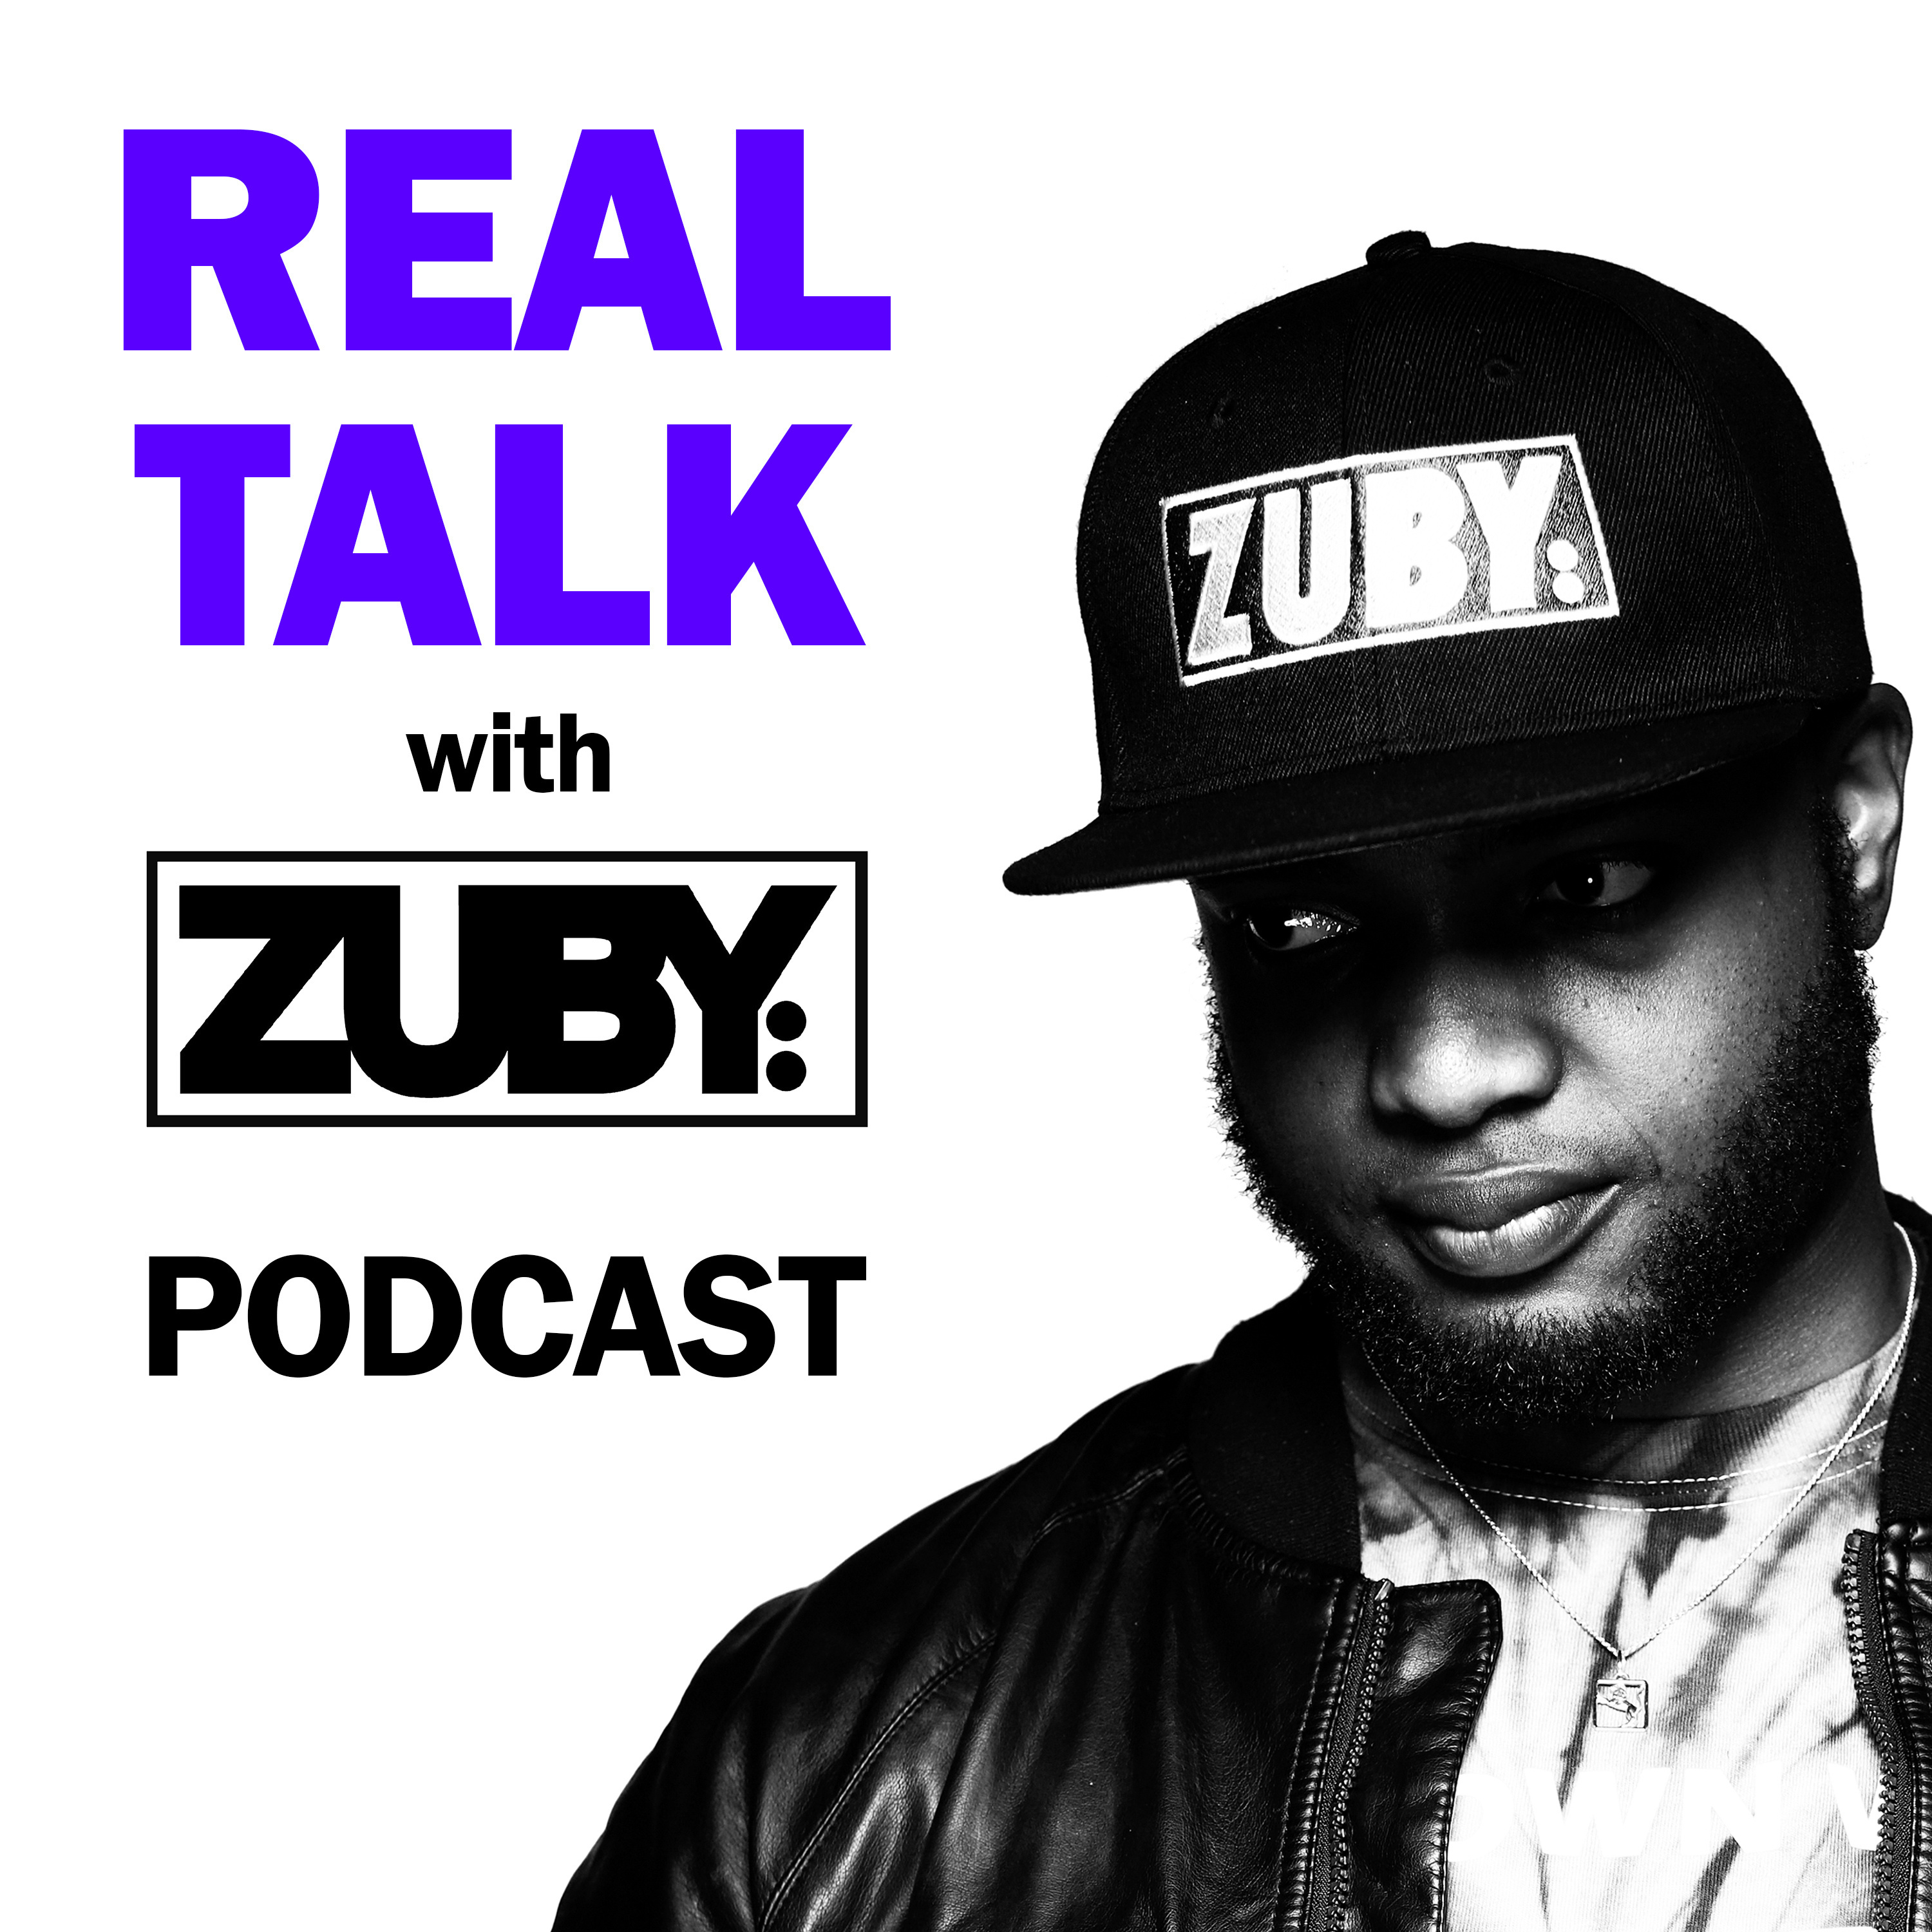 Real Talk With Zuby Intro